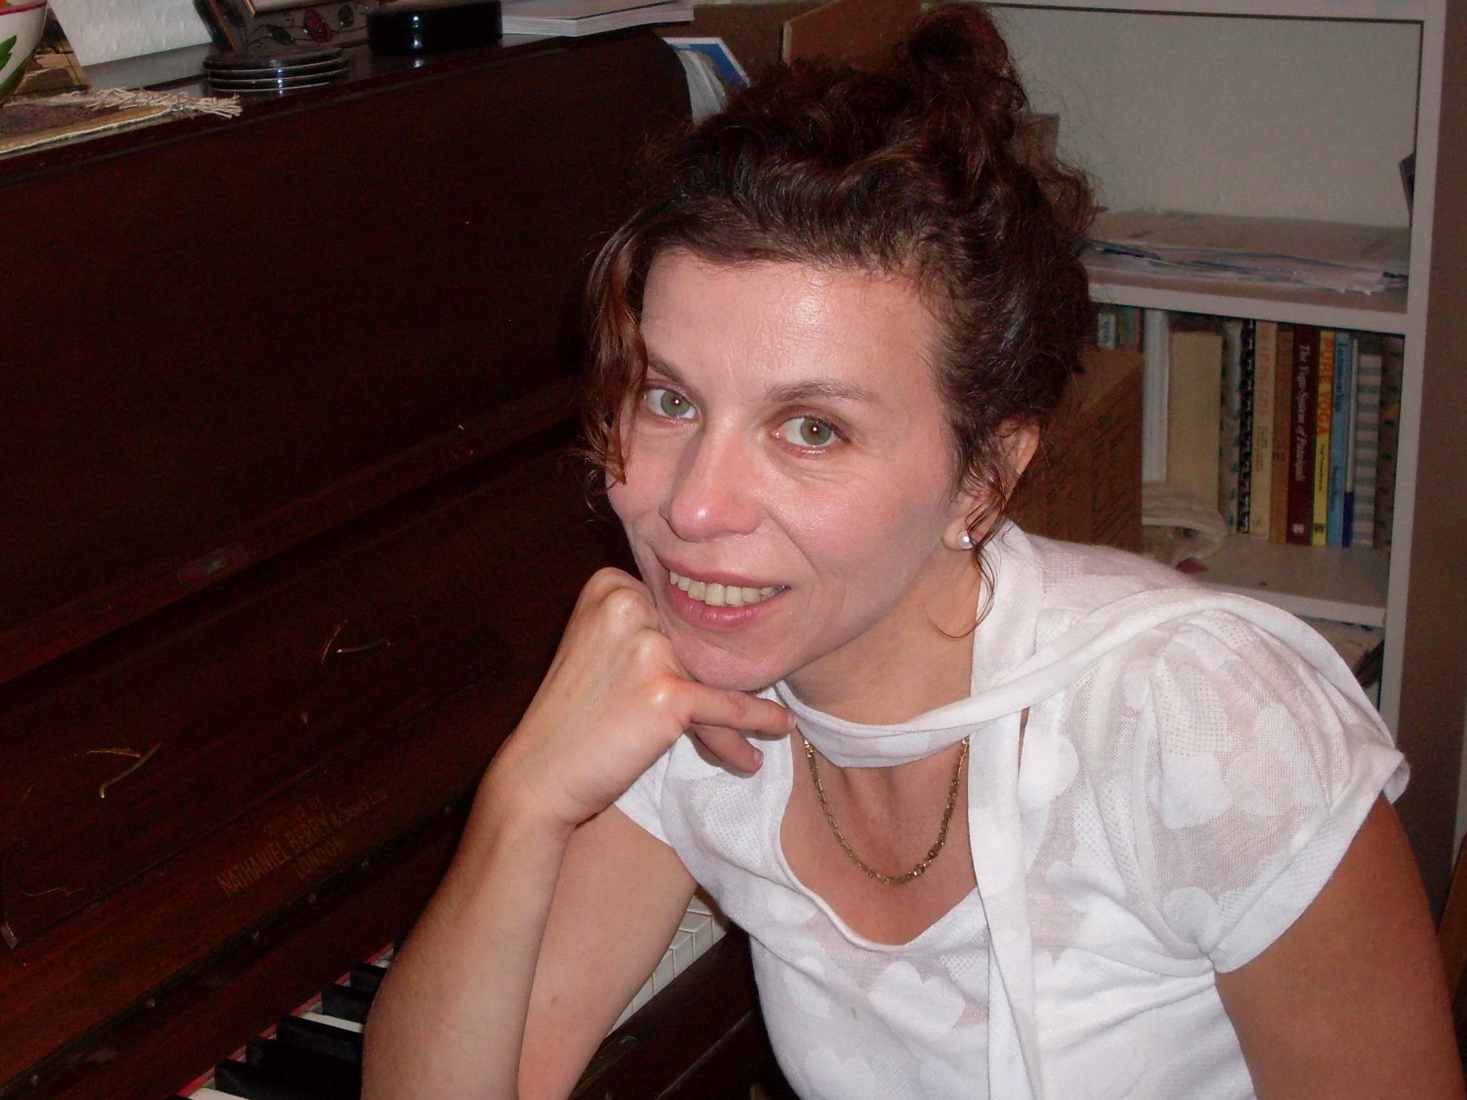 A woman in a white shirt is sitting in front of a piano